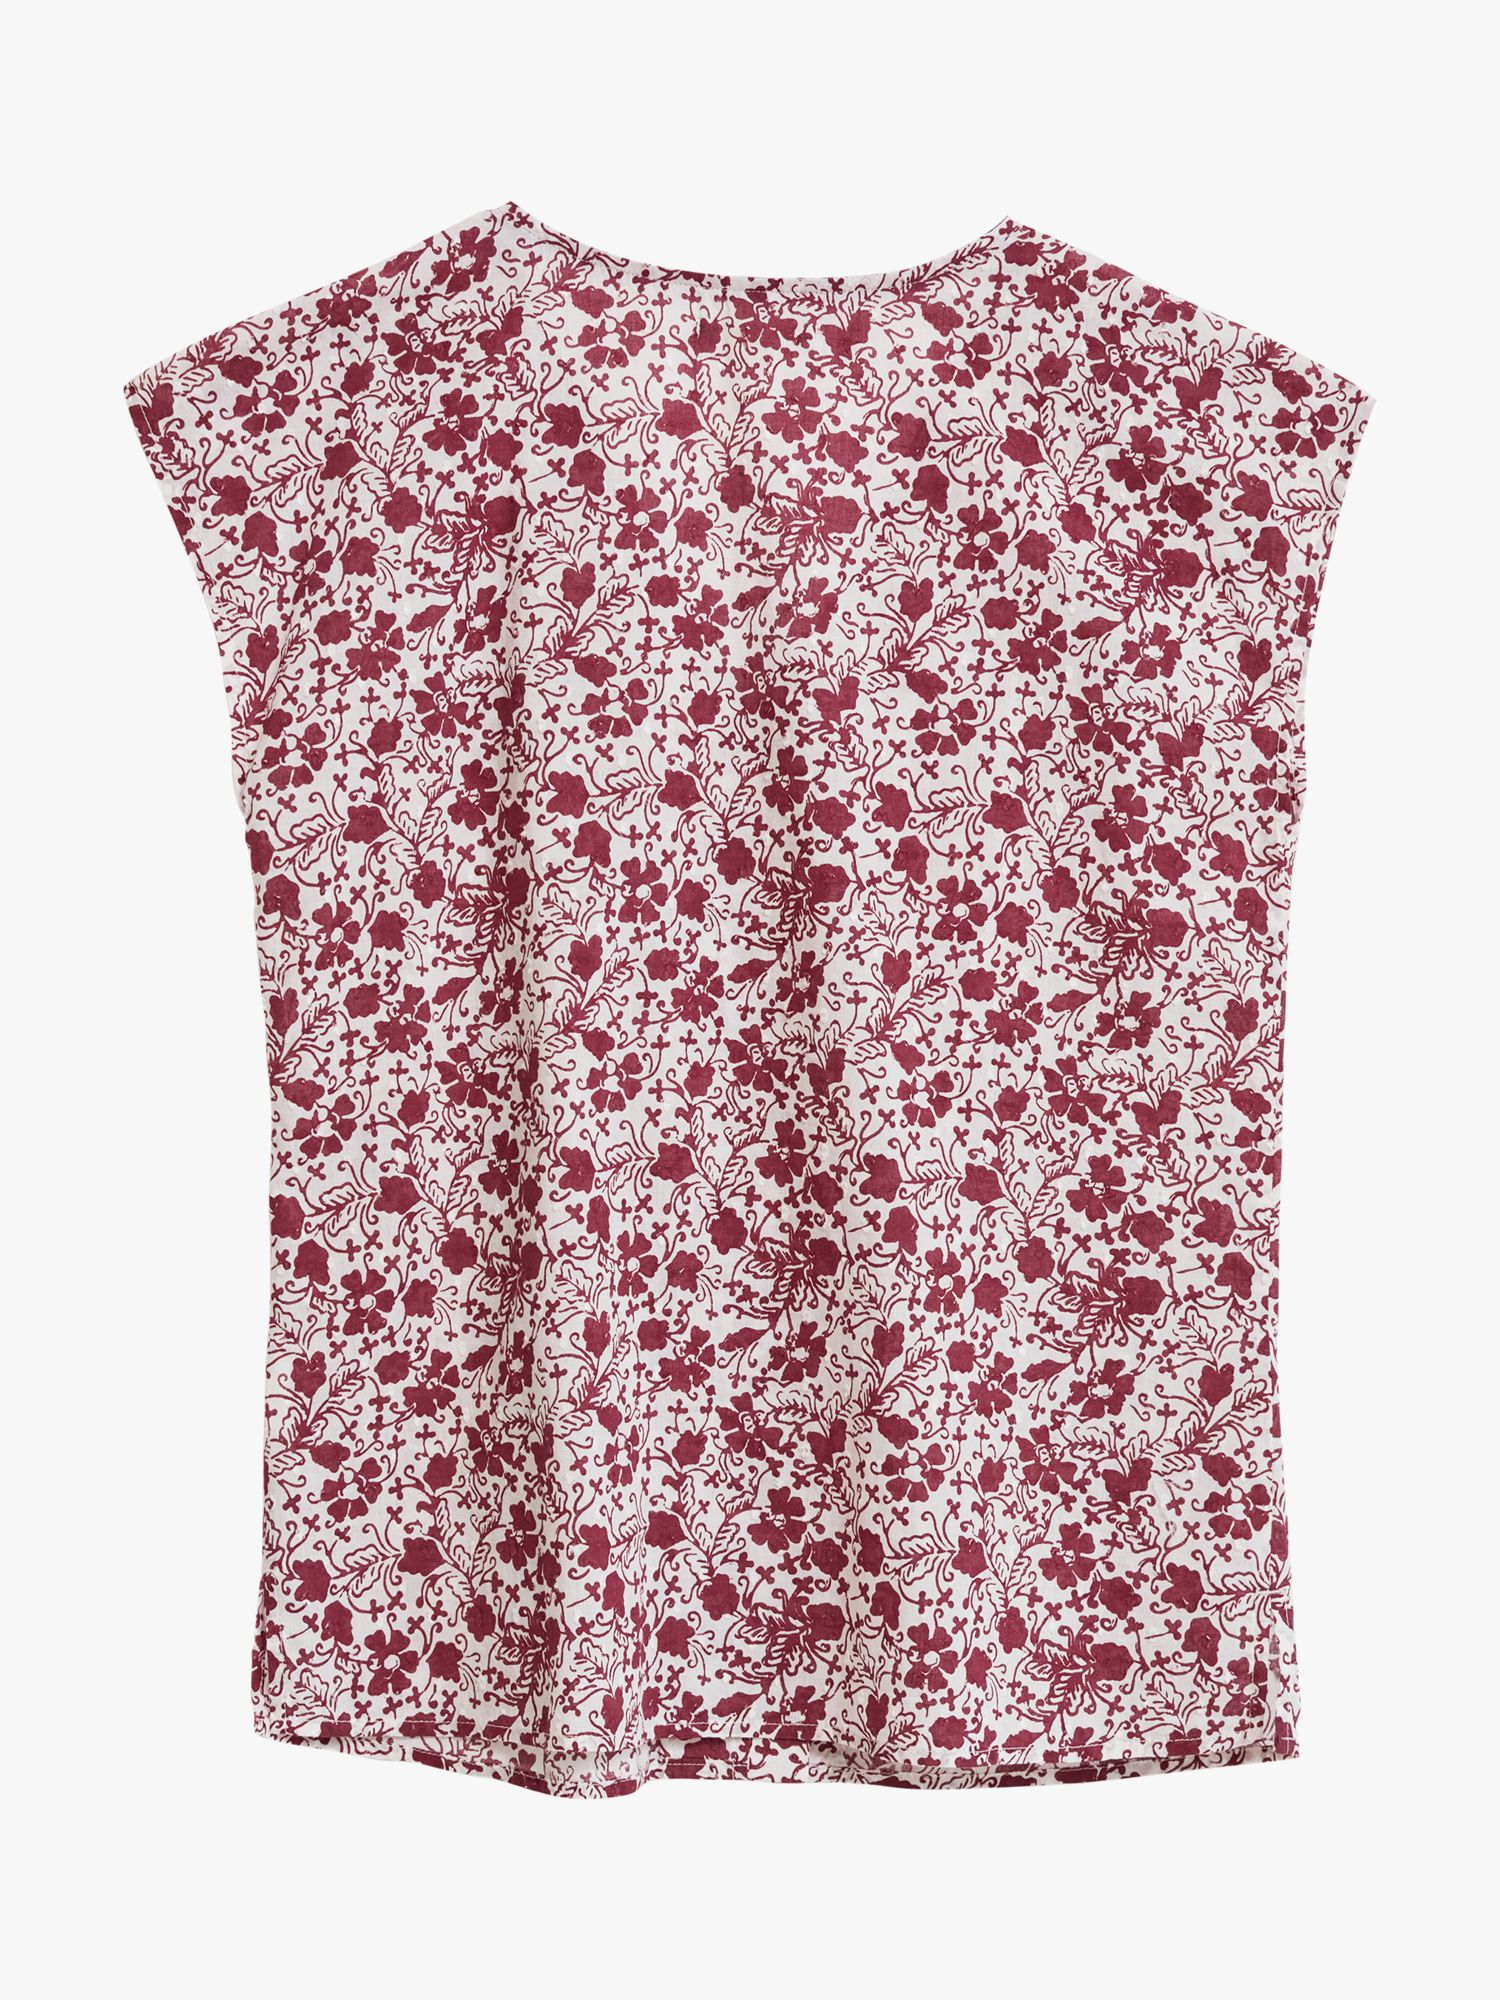 White Stuff Rae Cotton Floral Top, Red at John Lewis & Partners